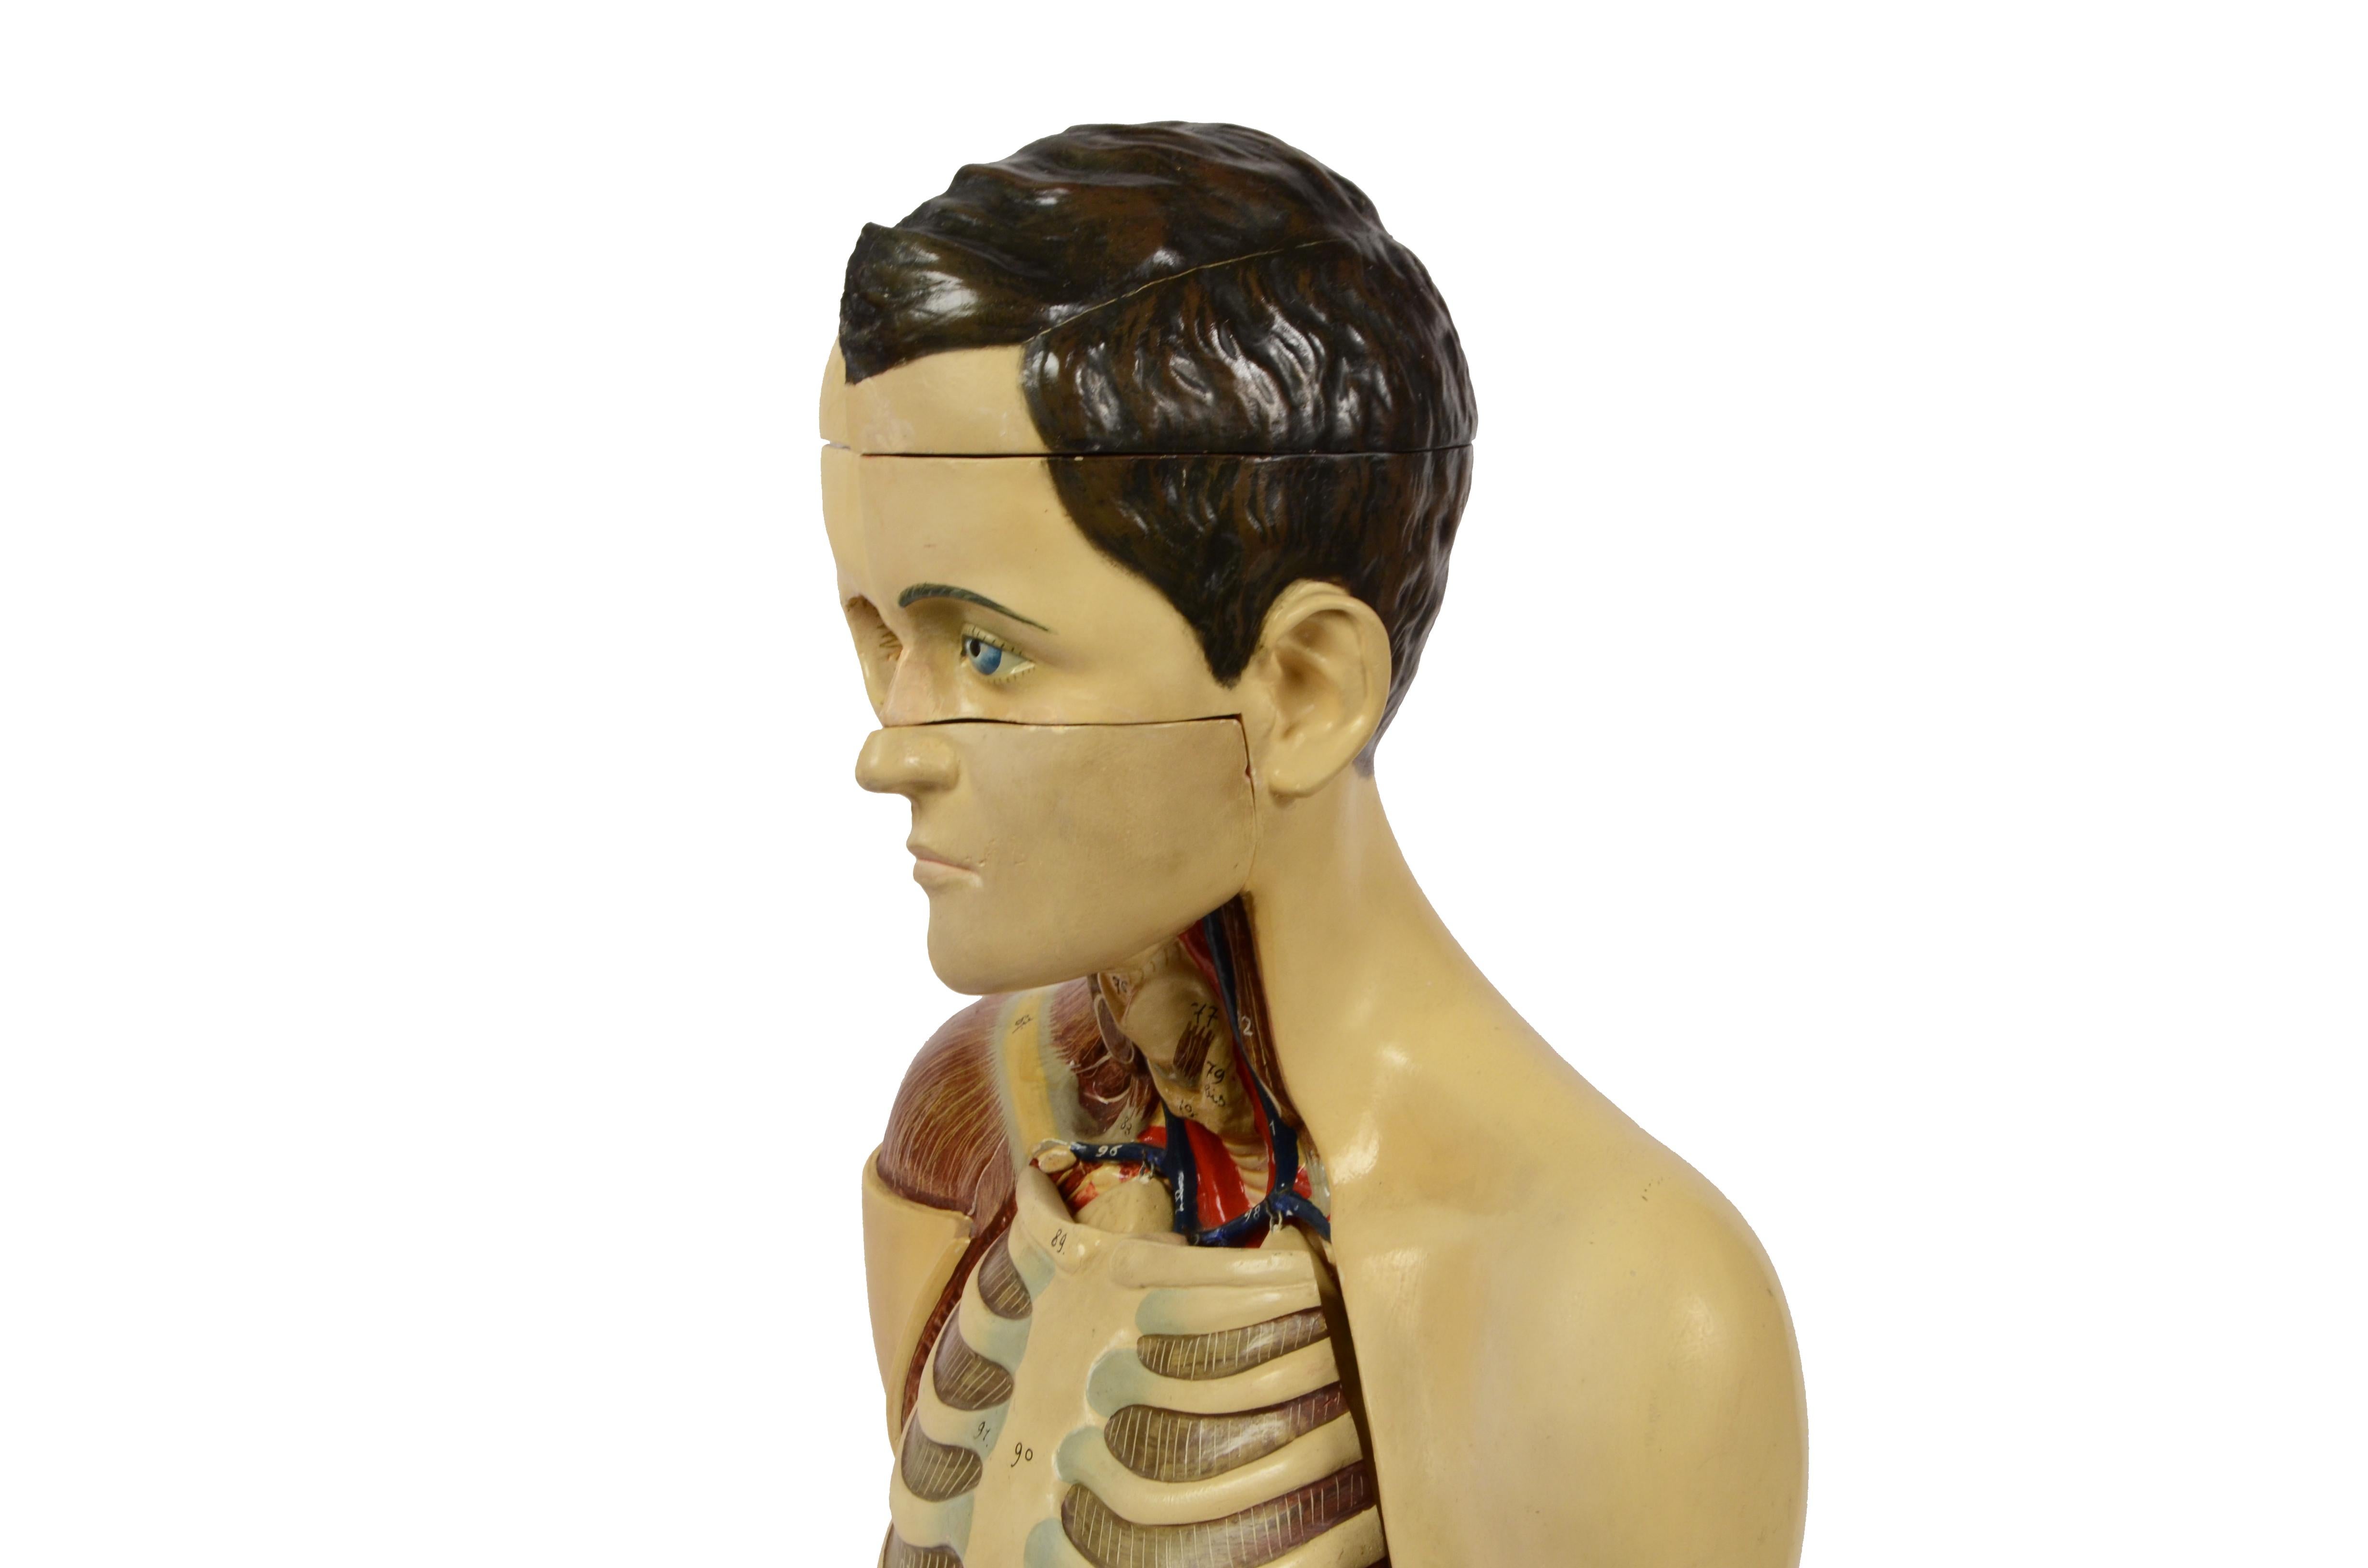 1900s Didactic Anatomical Torso with Removable Organs Scale 1:1 A. Fumeo Milano 10